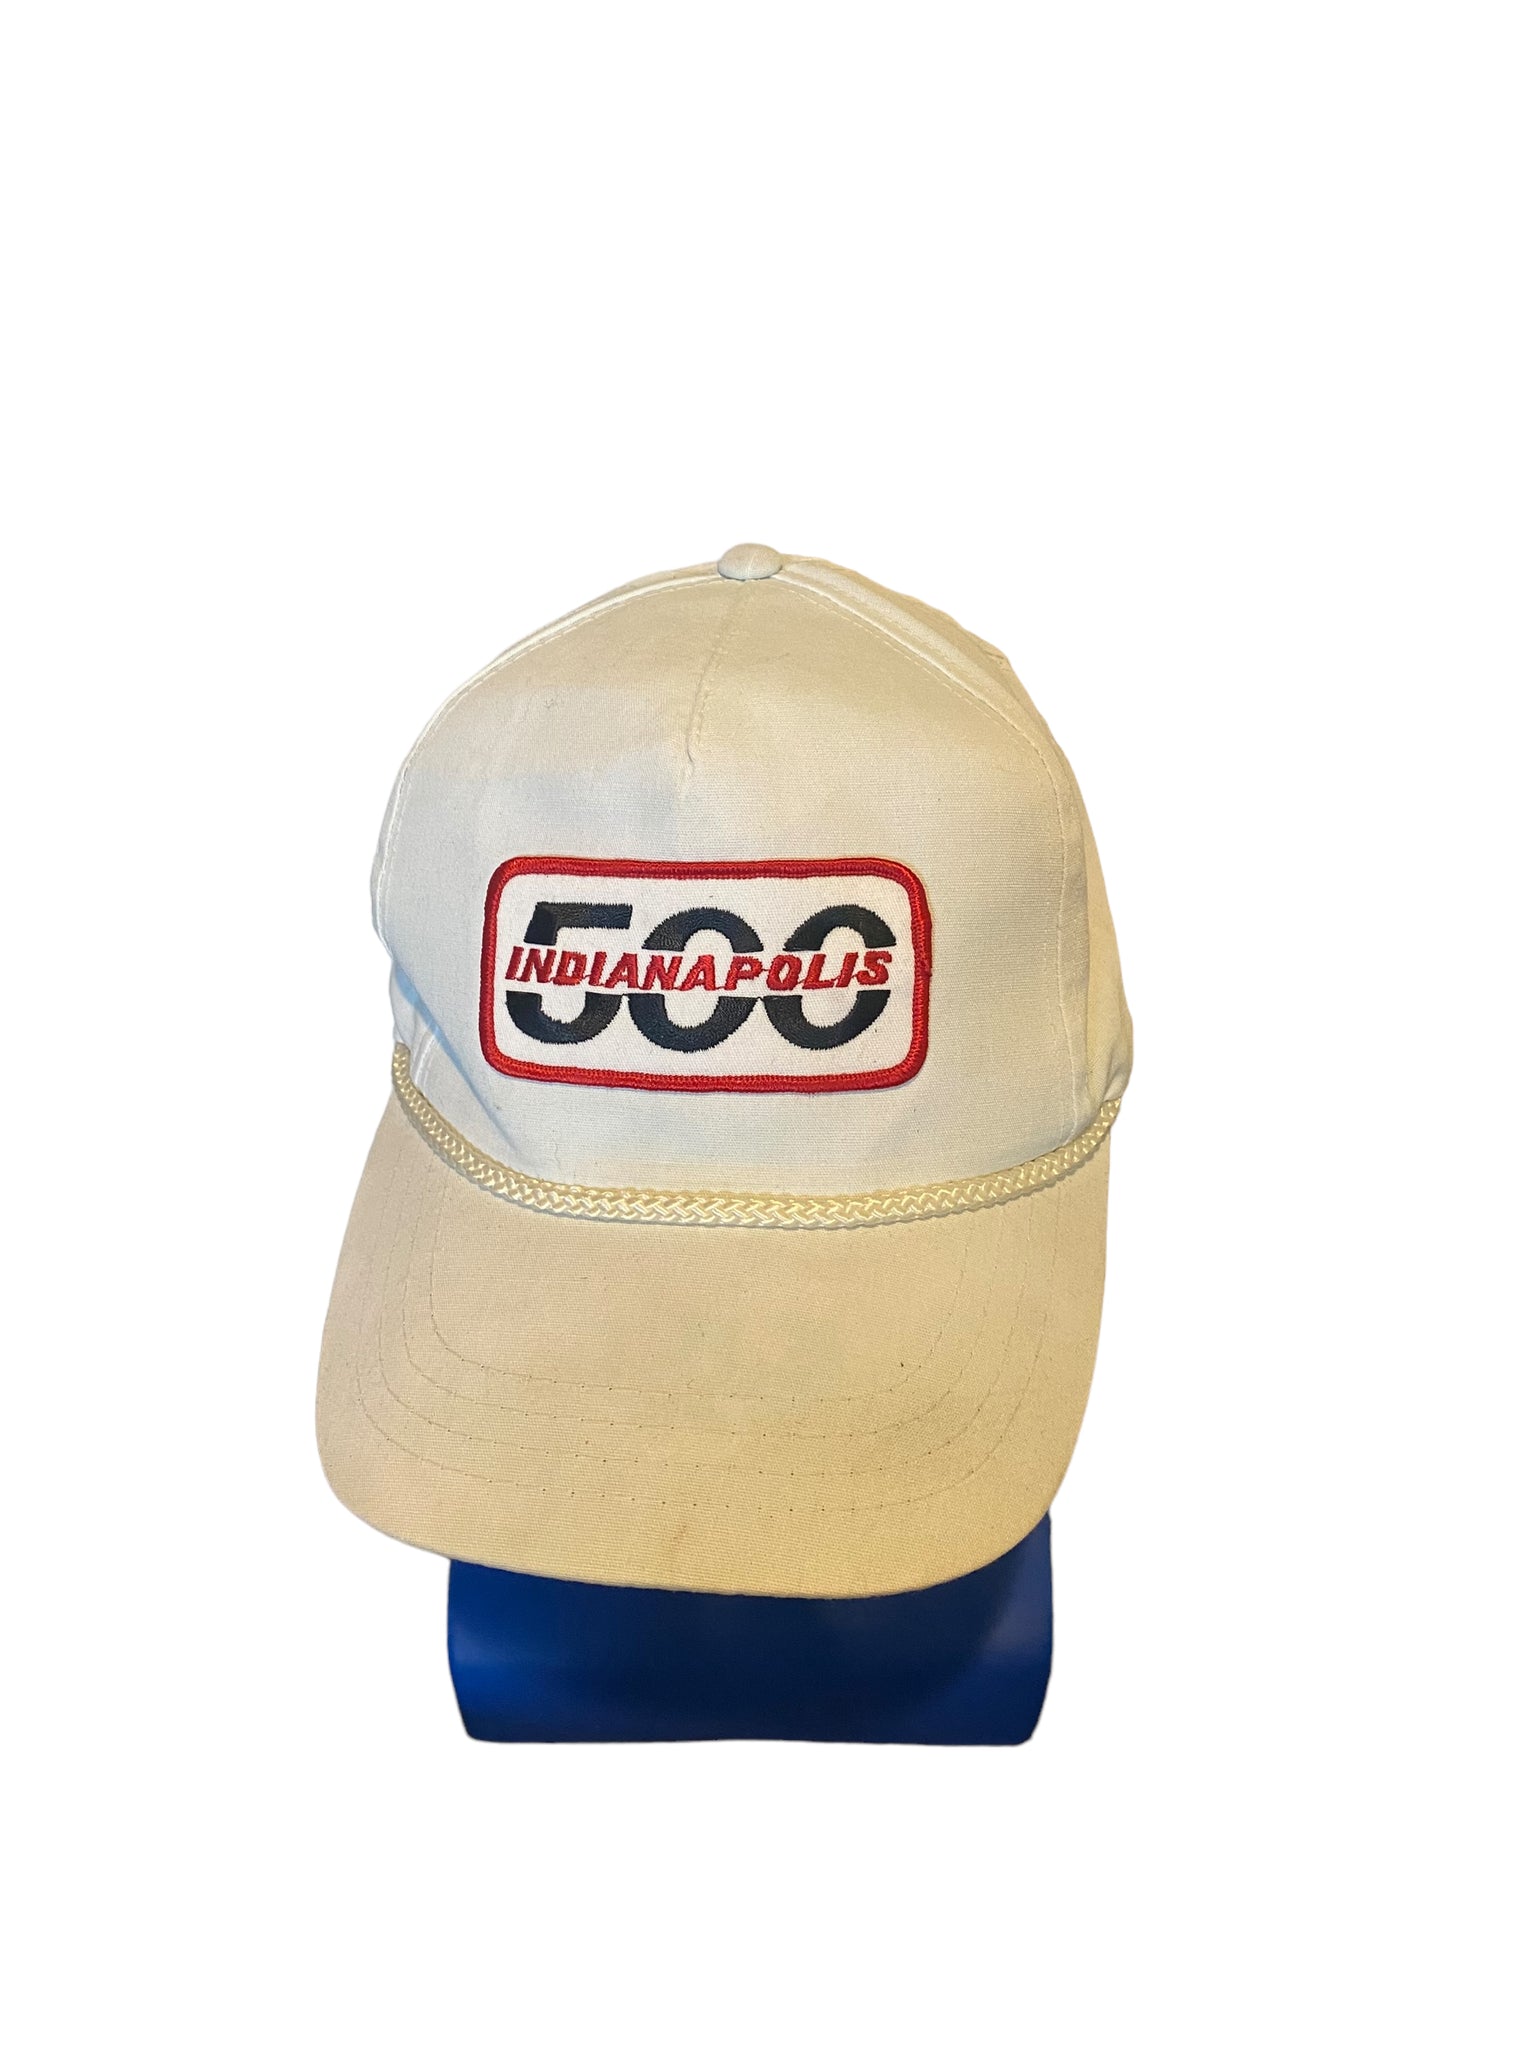 Vintage Indianapolis 500 patch Hat Snapback White